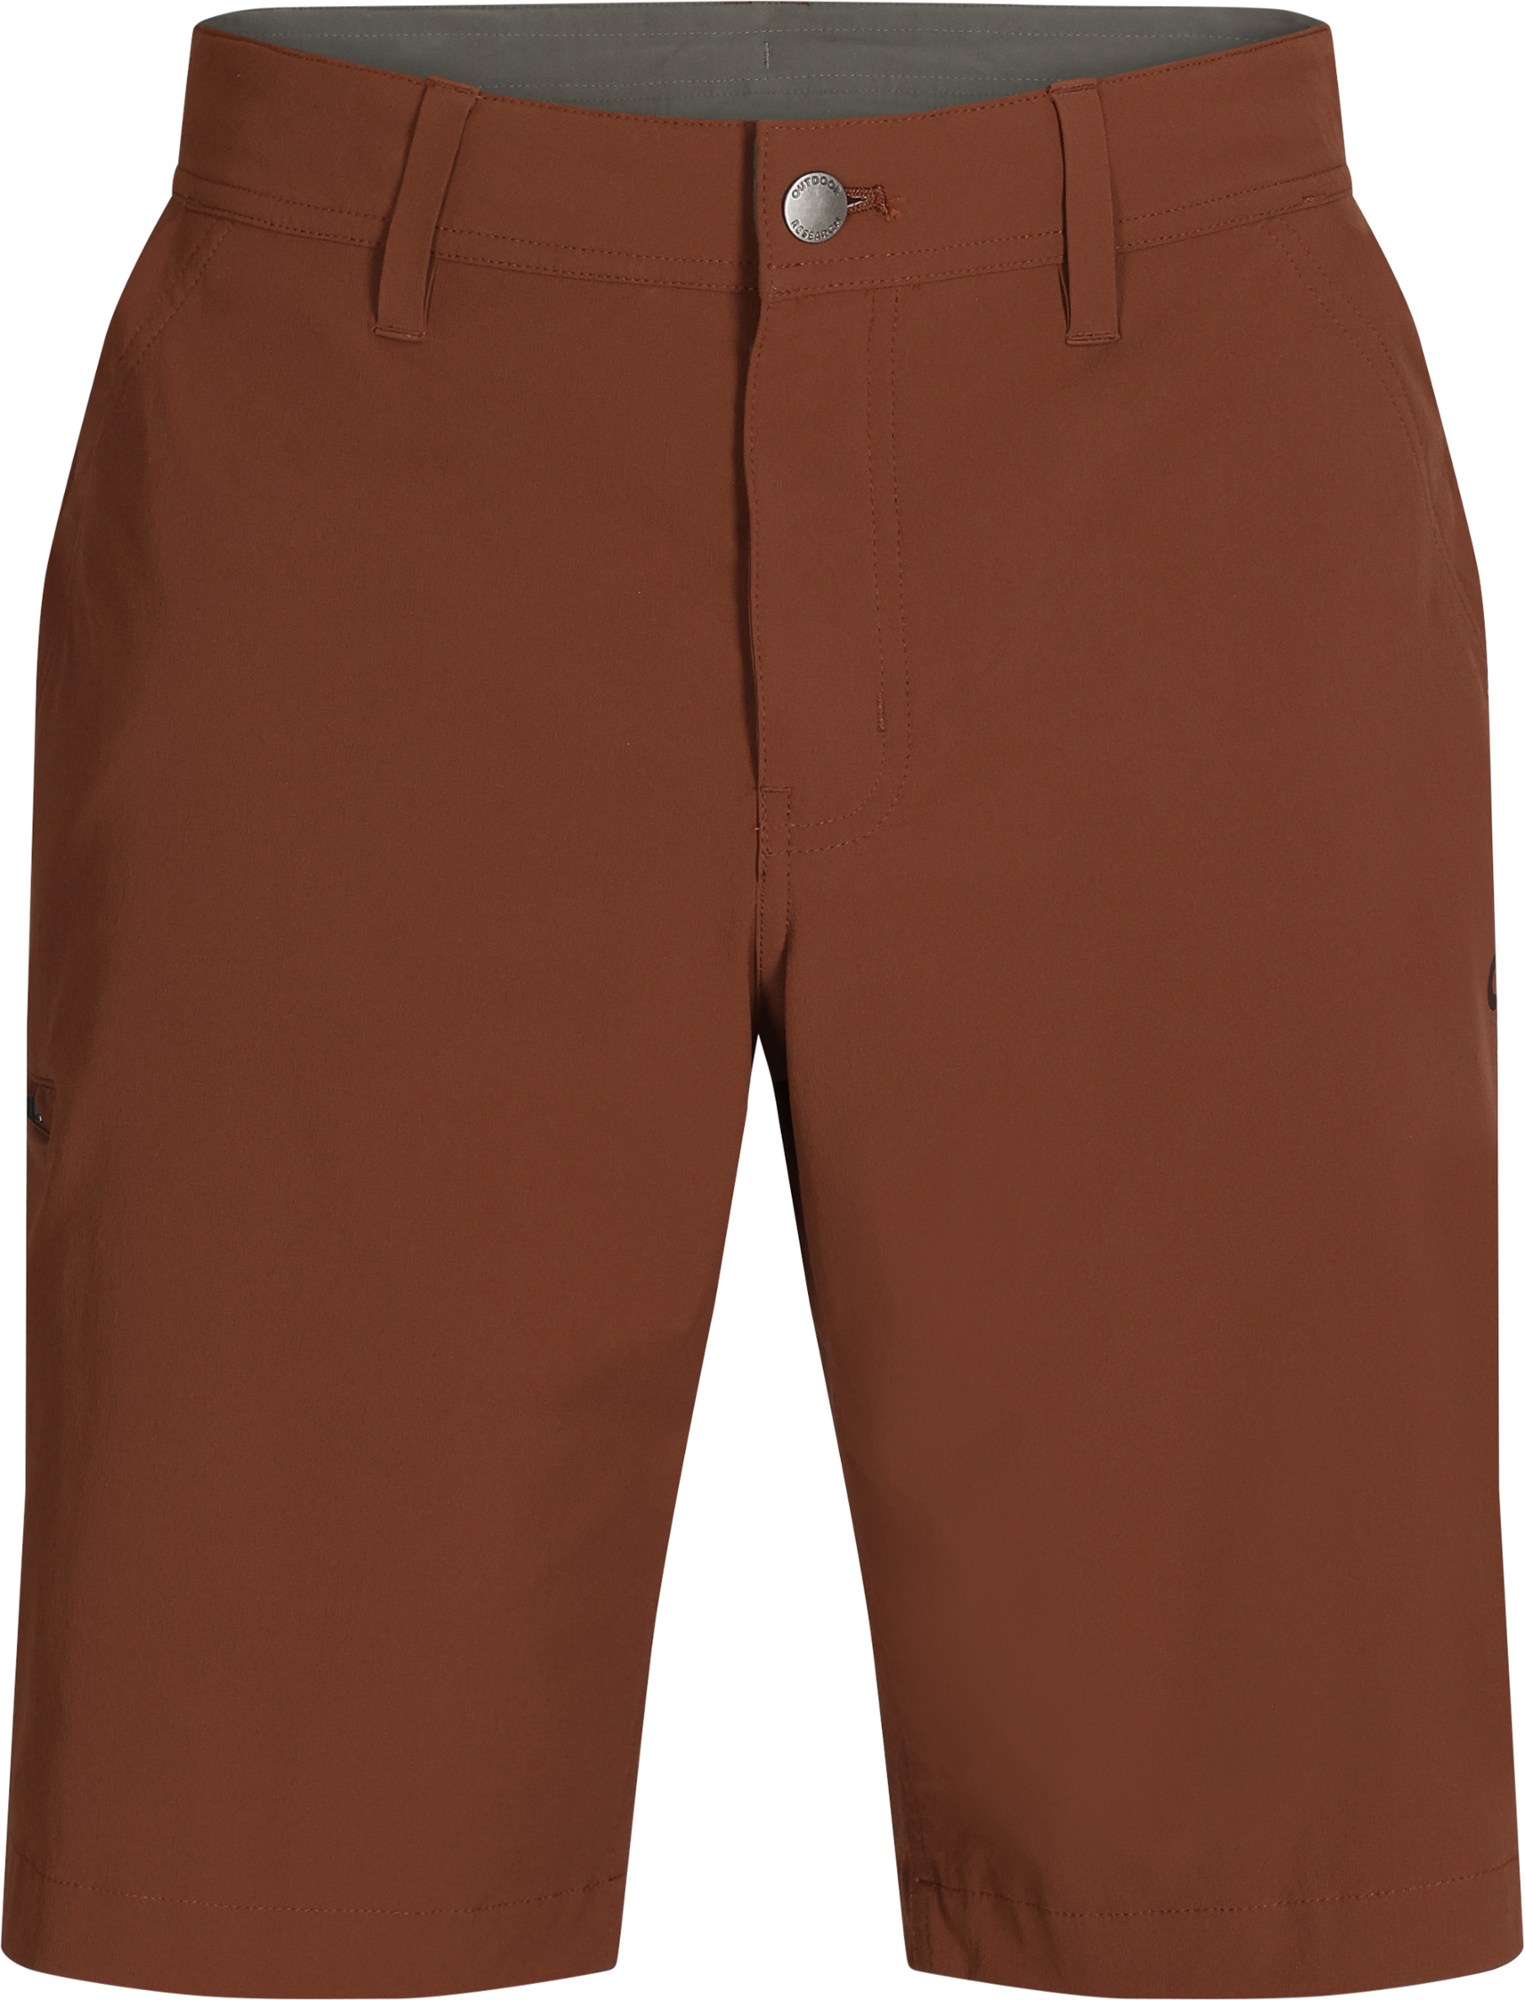 Stay Cool and Comfortable in These Top-Rated Men's Hiking Shorts